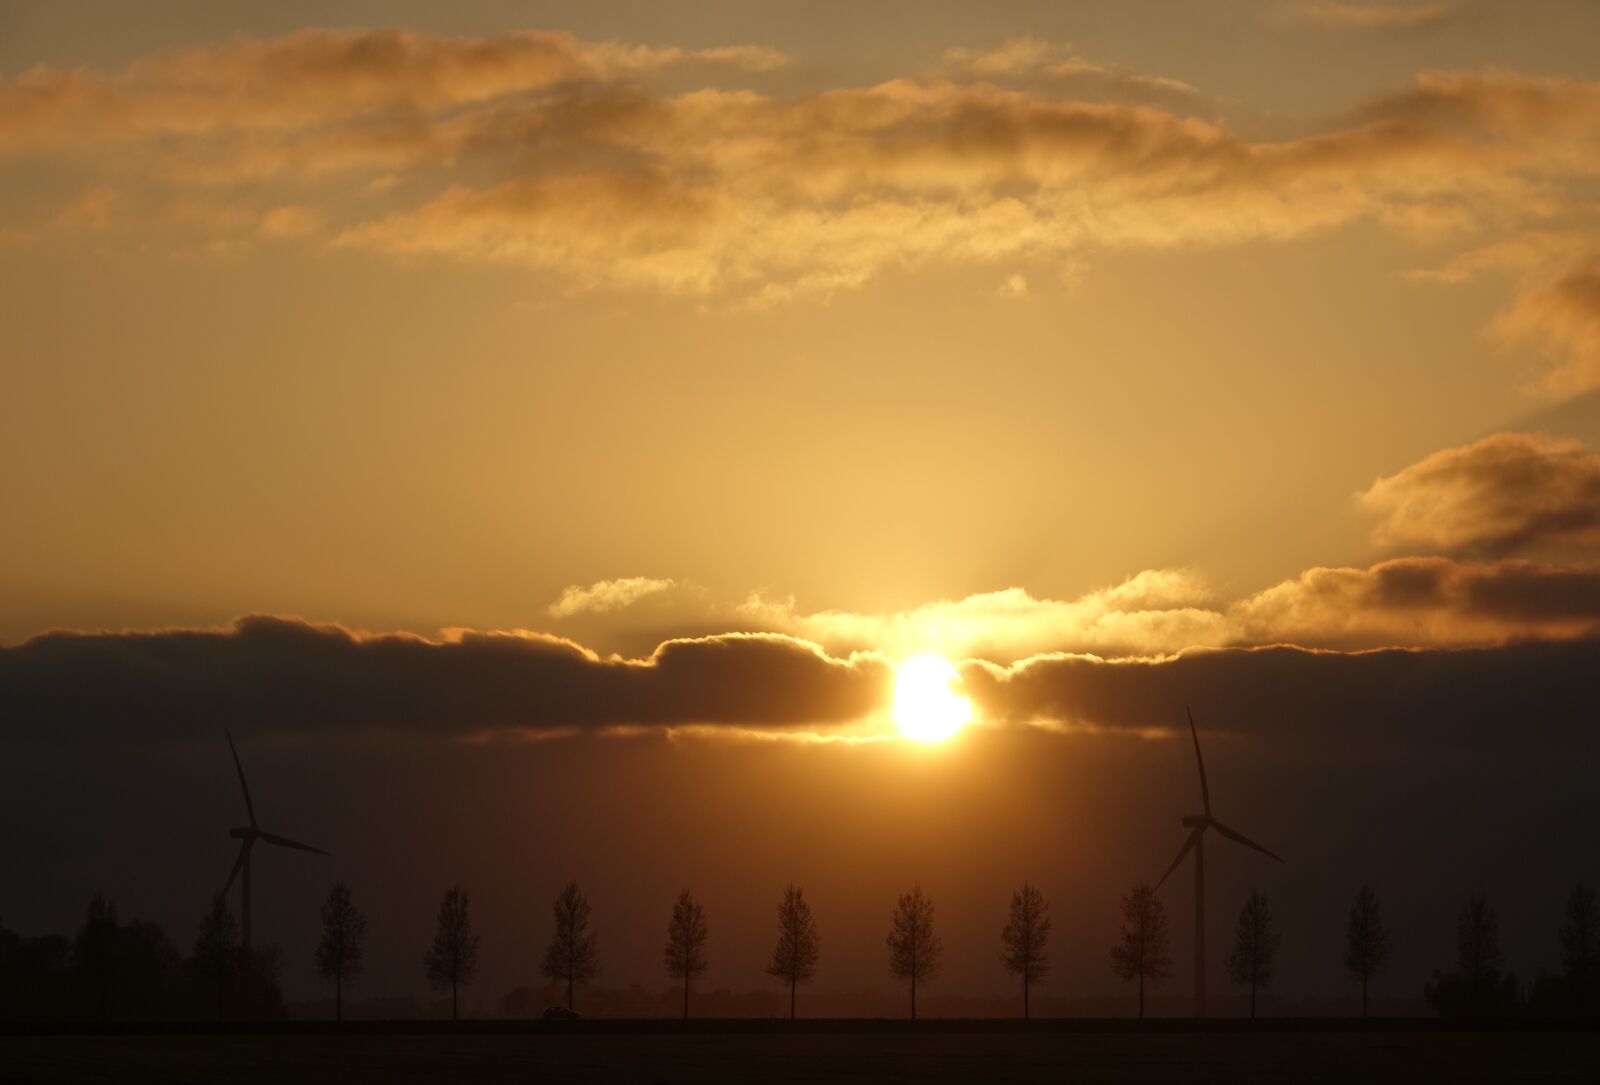 Sony Cyber-shot DSC-RX10 III sample photo. Sunset, wind mill, clouds photography